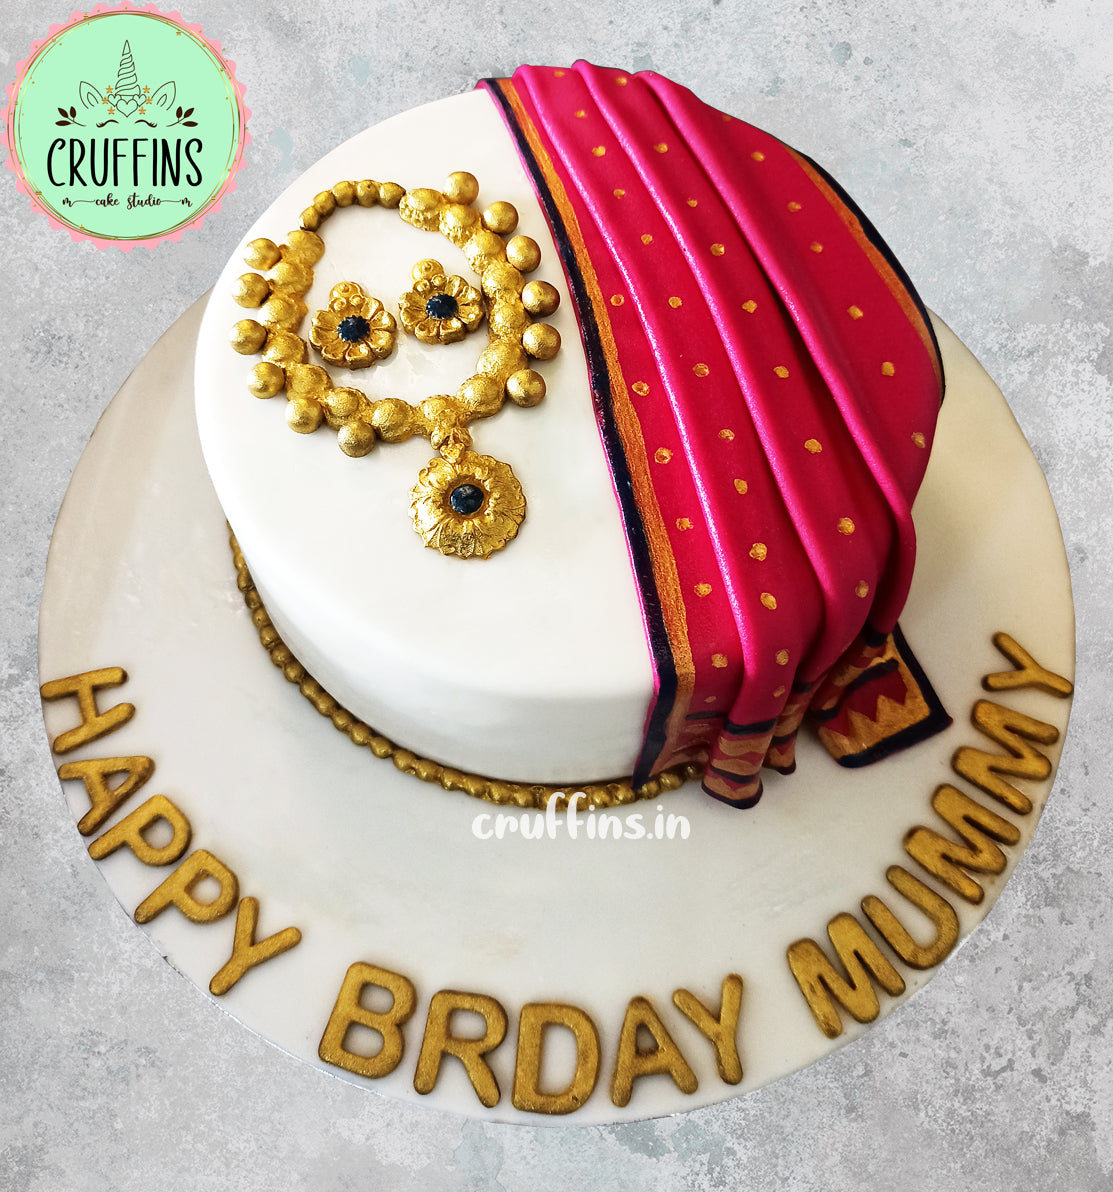 Buy Saree themed Cakes Online in Gurgoan - Free Delivery